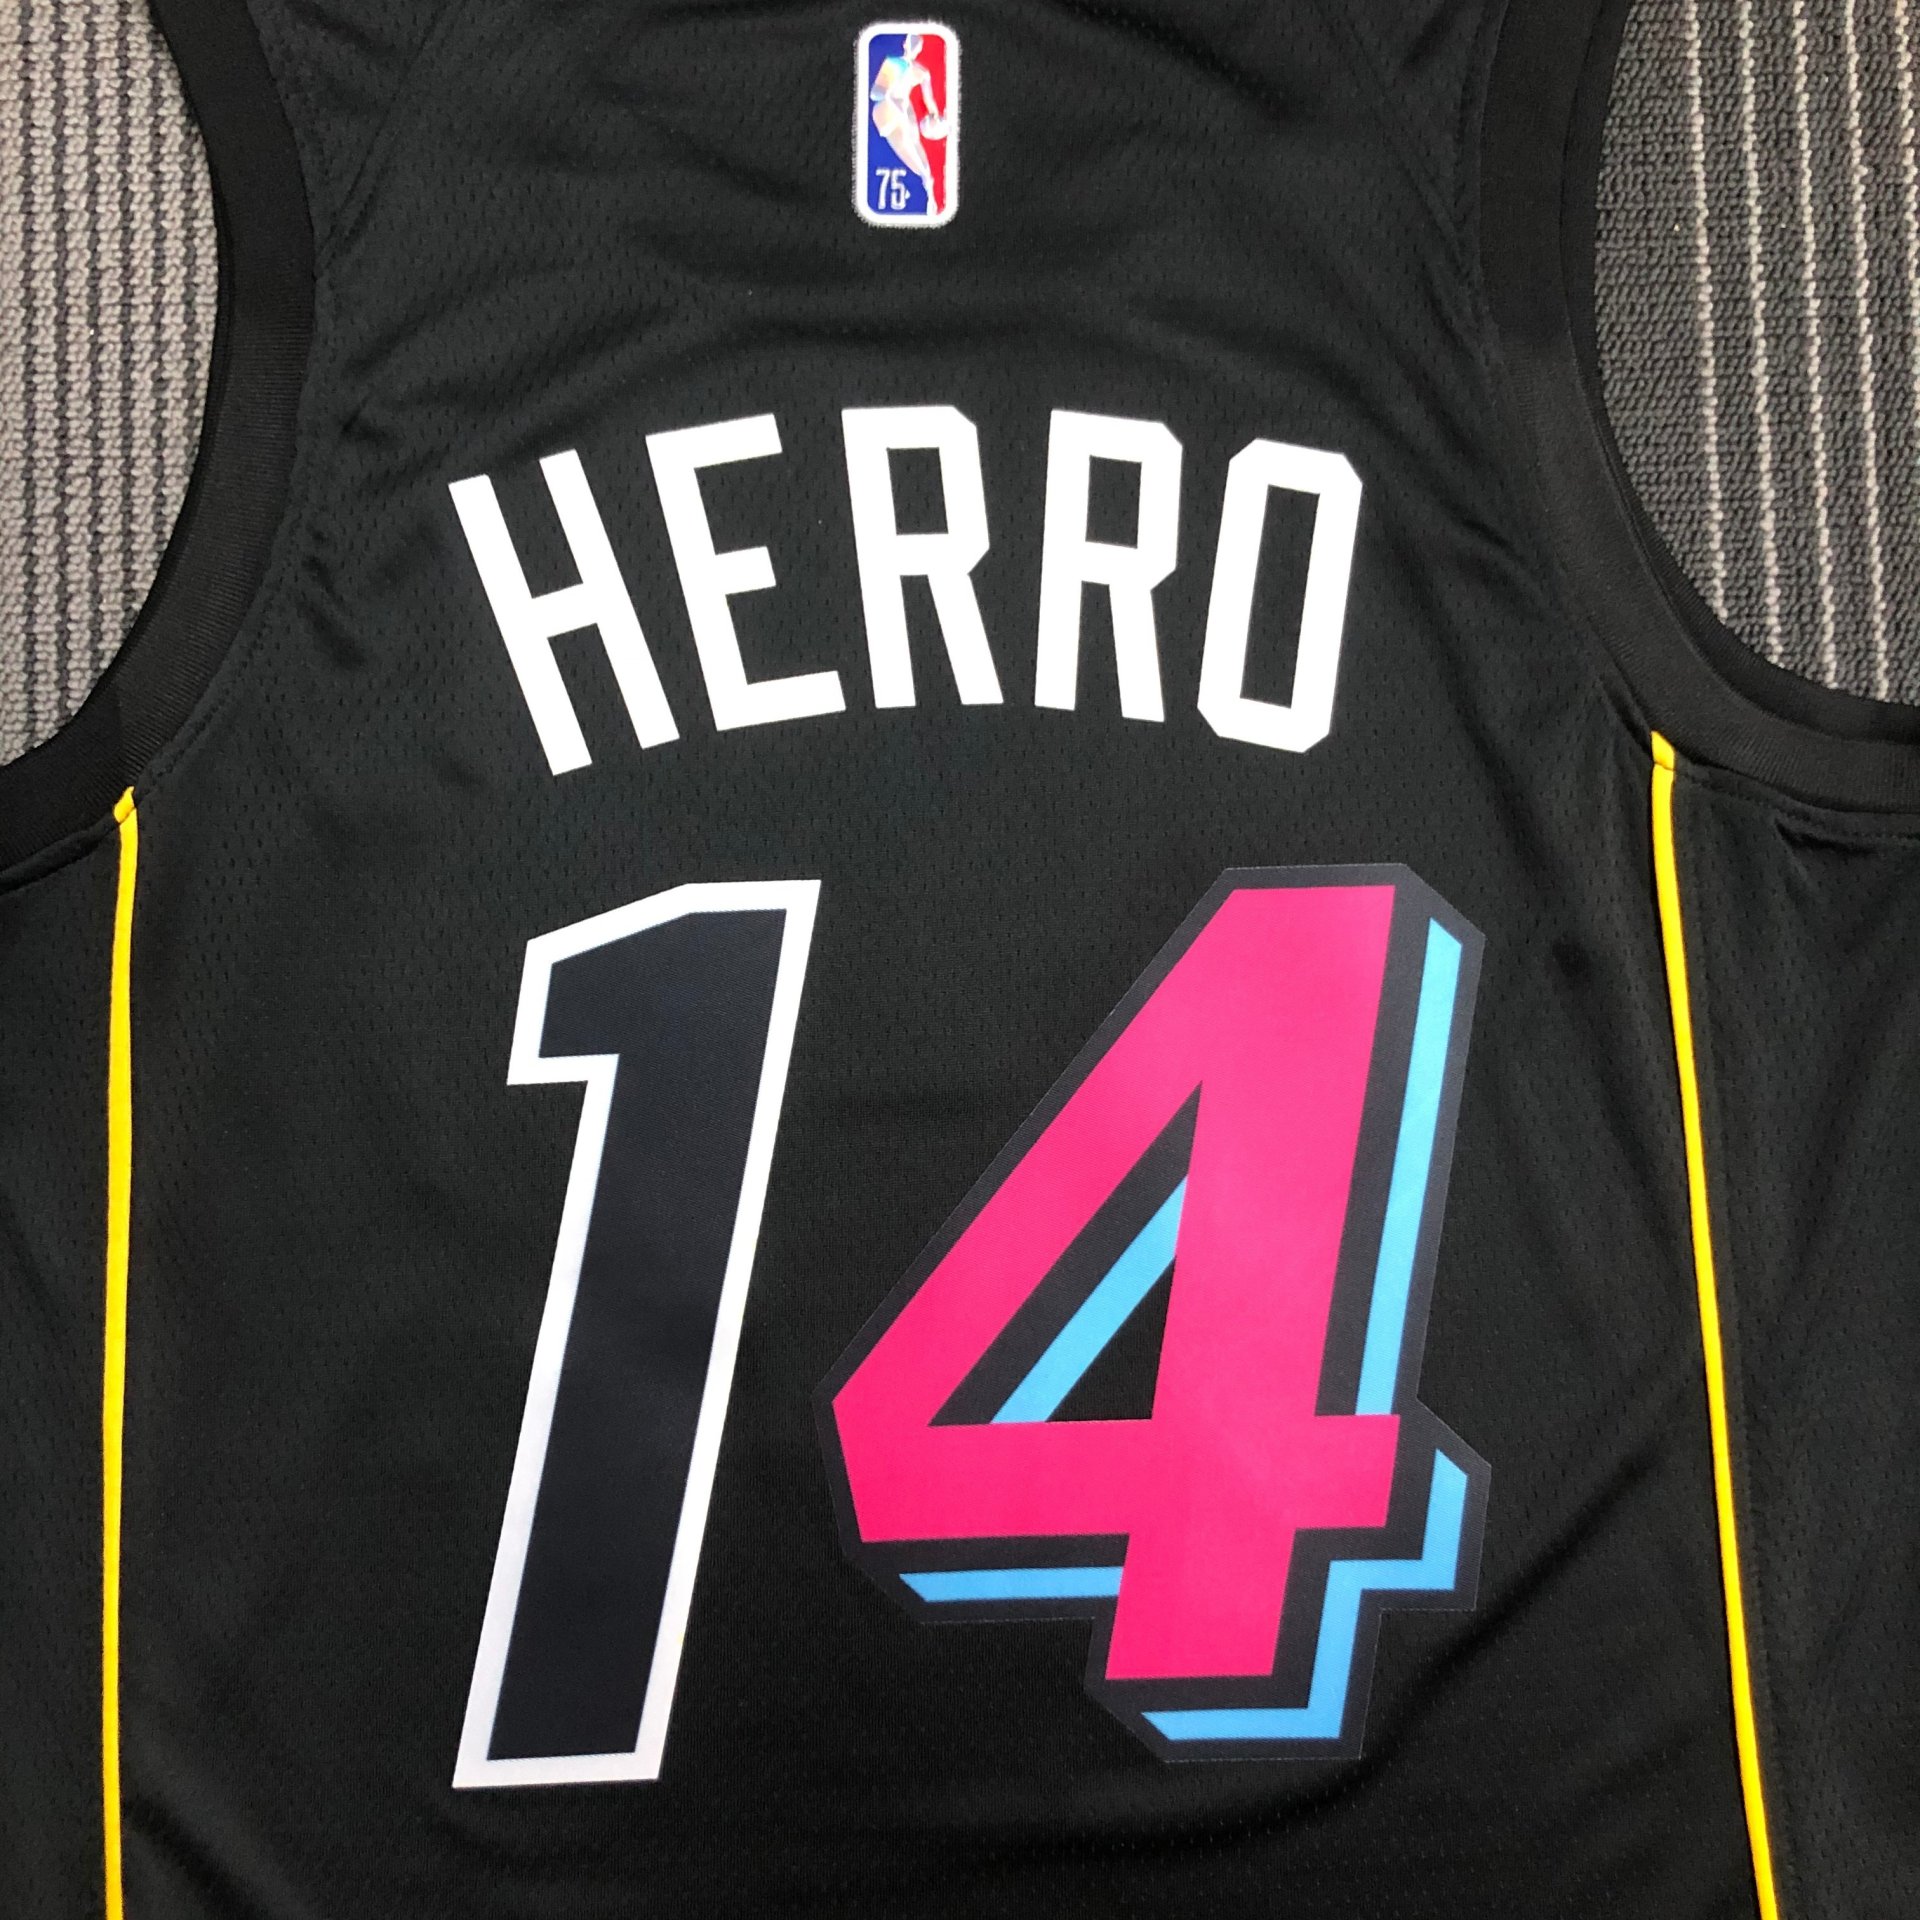 Source Best Quality Stitched Tyler Herro City Edition Jersey on m